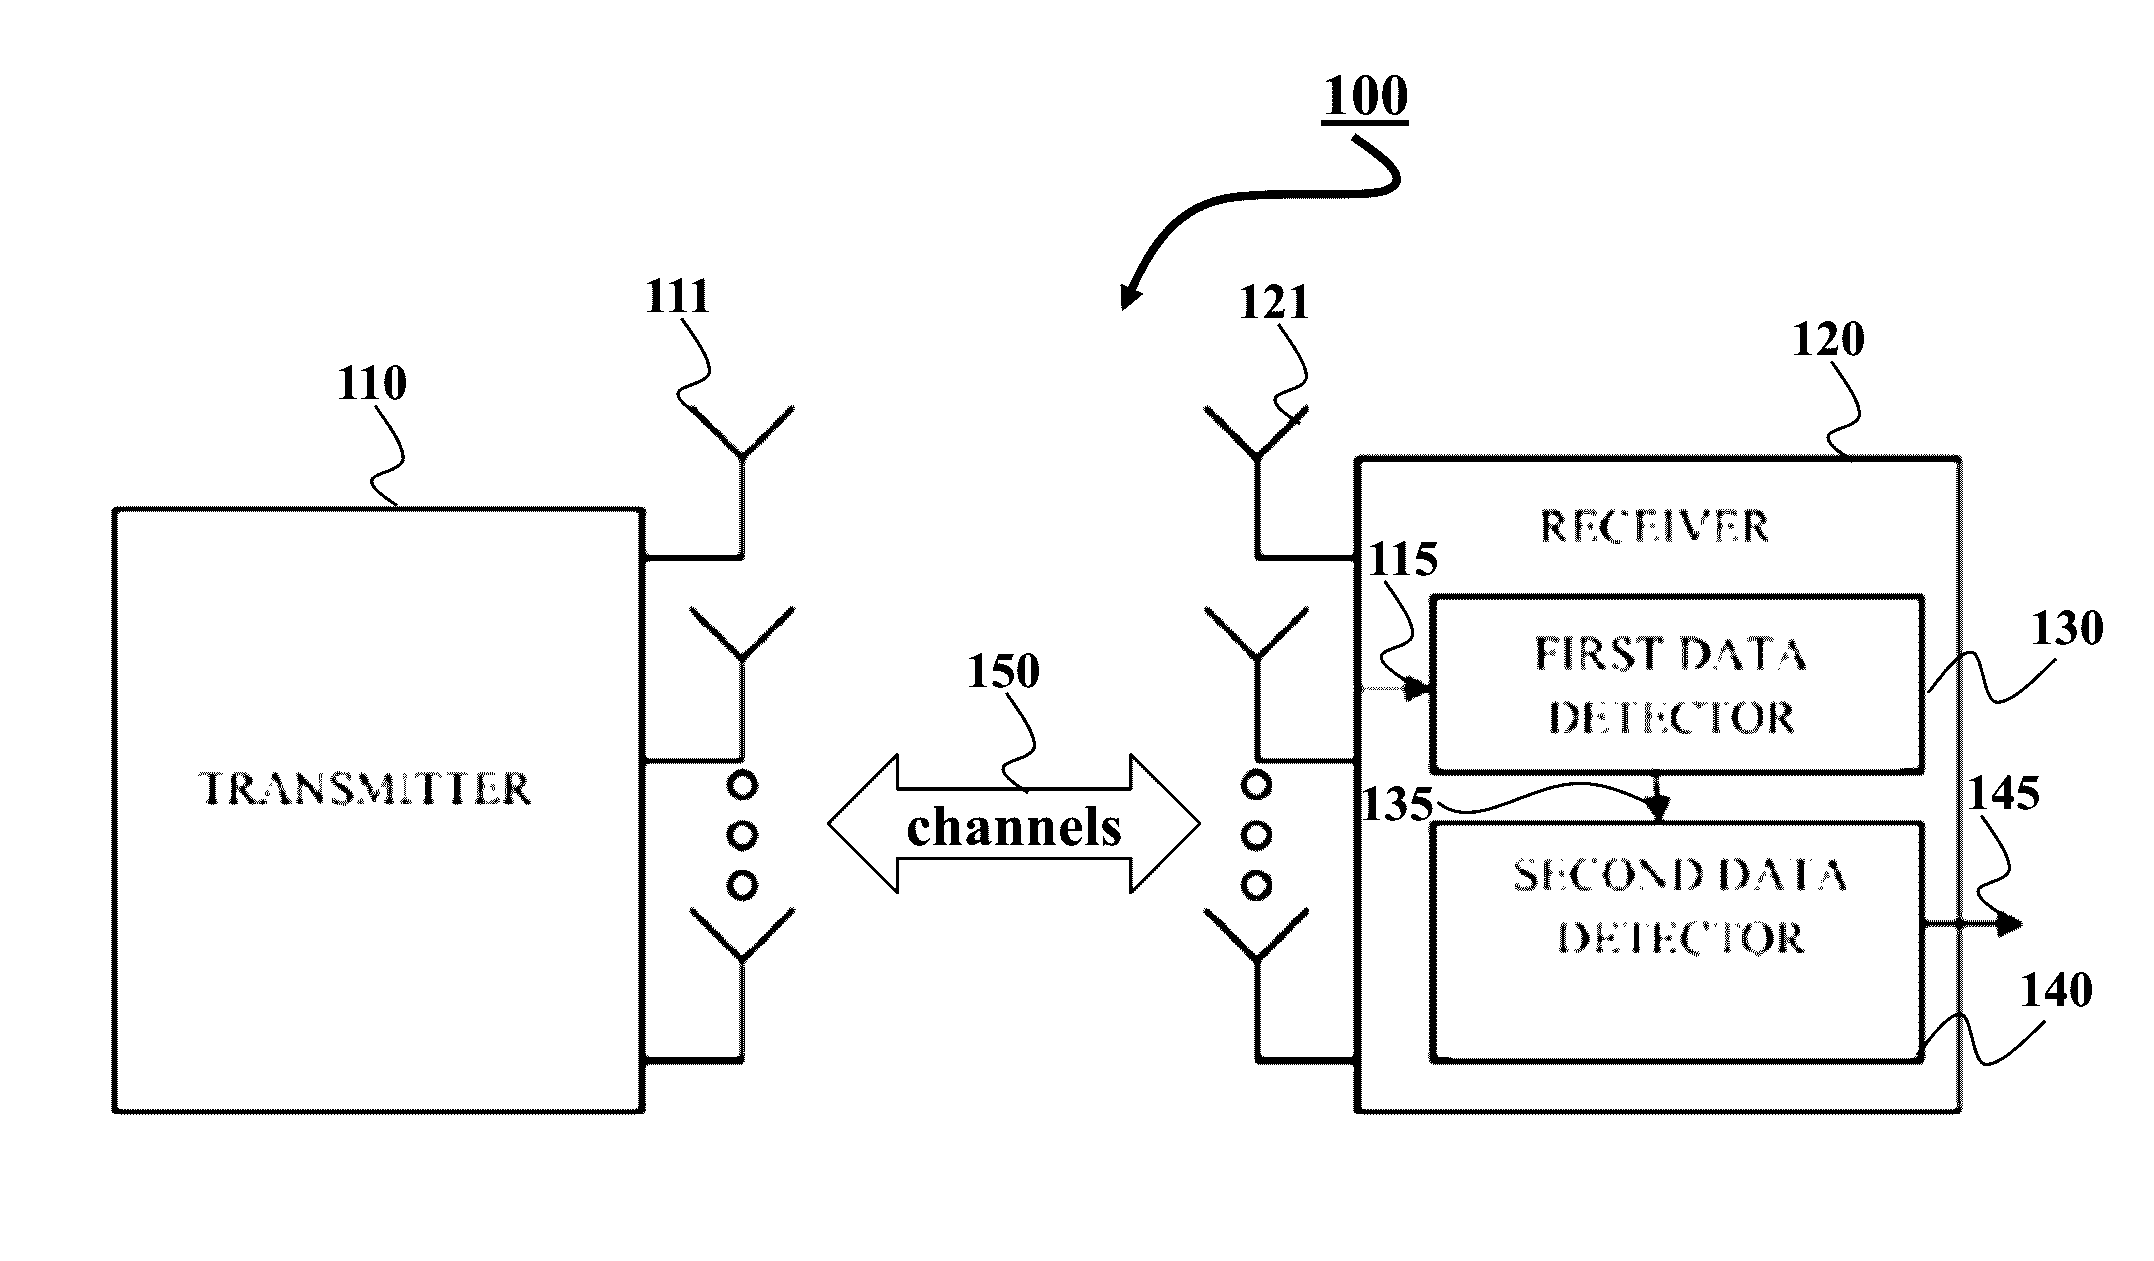 System and method for decoding block of data received over communication channel